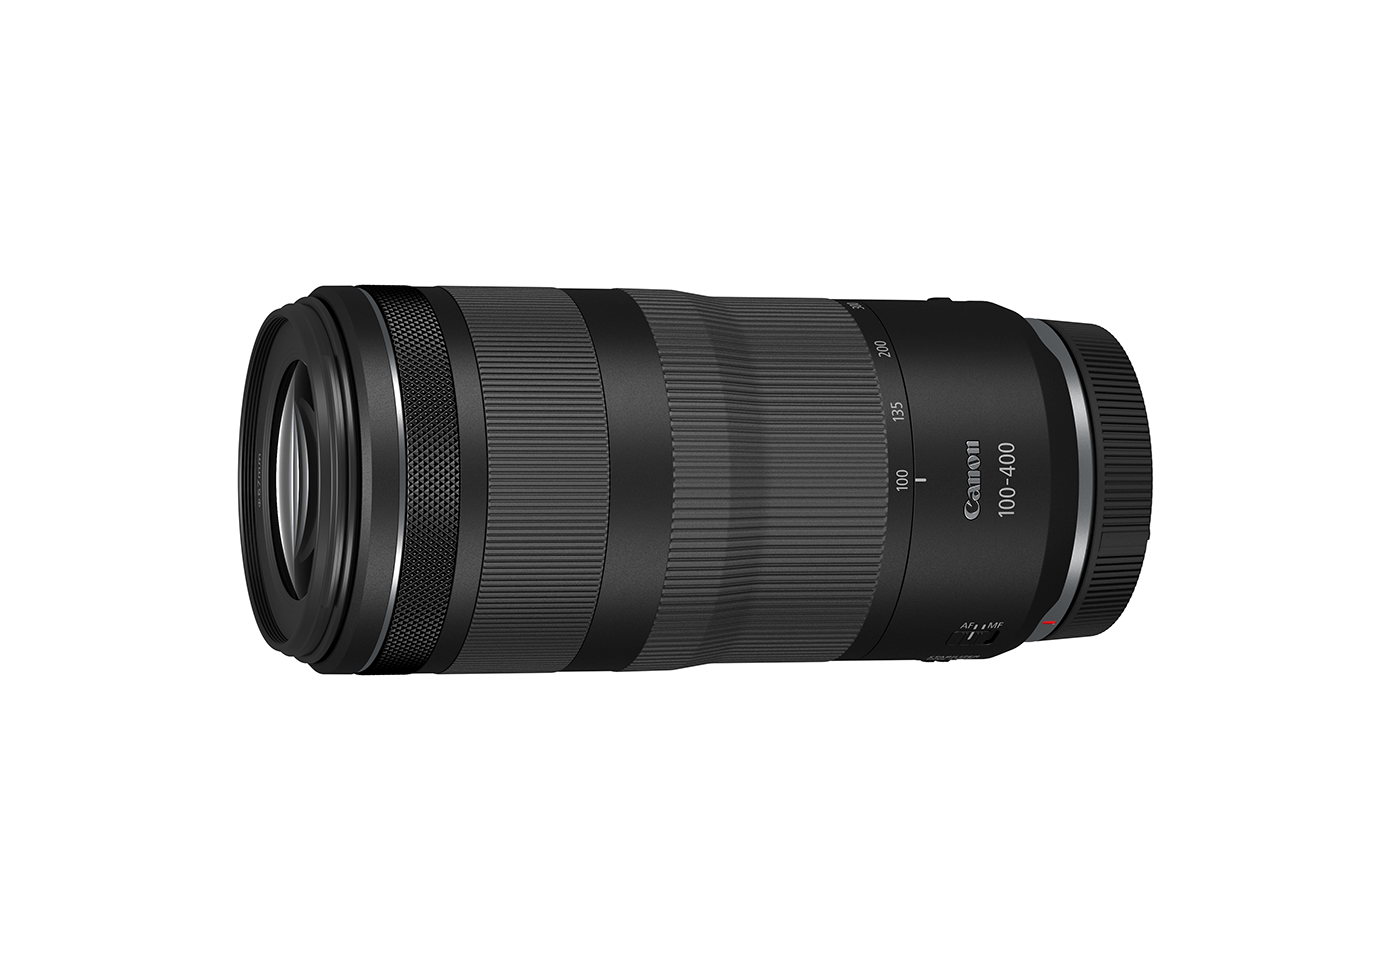 Product image of RF 100-400mm F5.6-8 IS USM telephoto lens